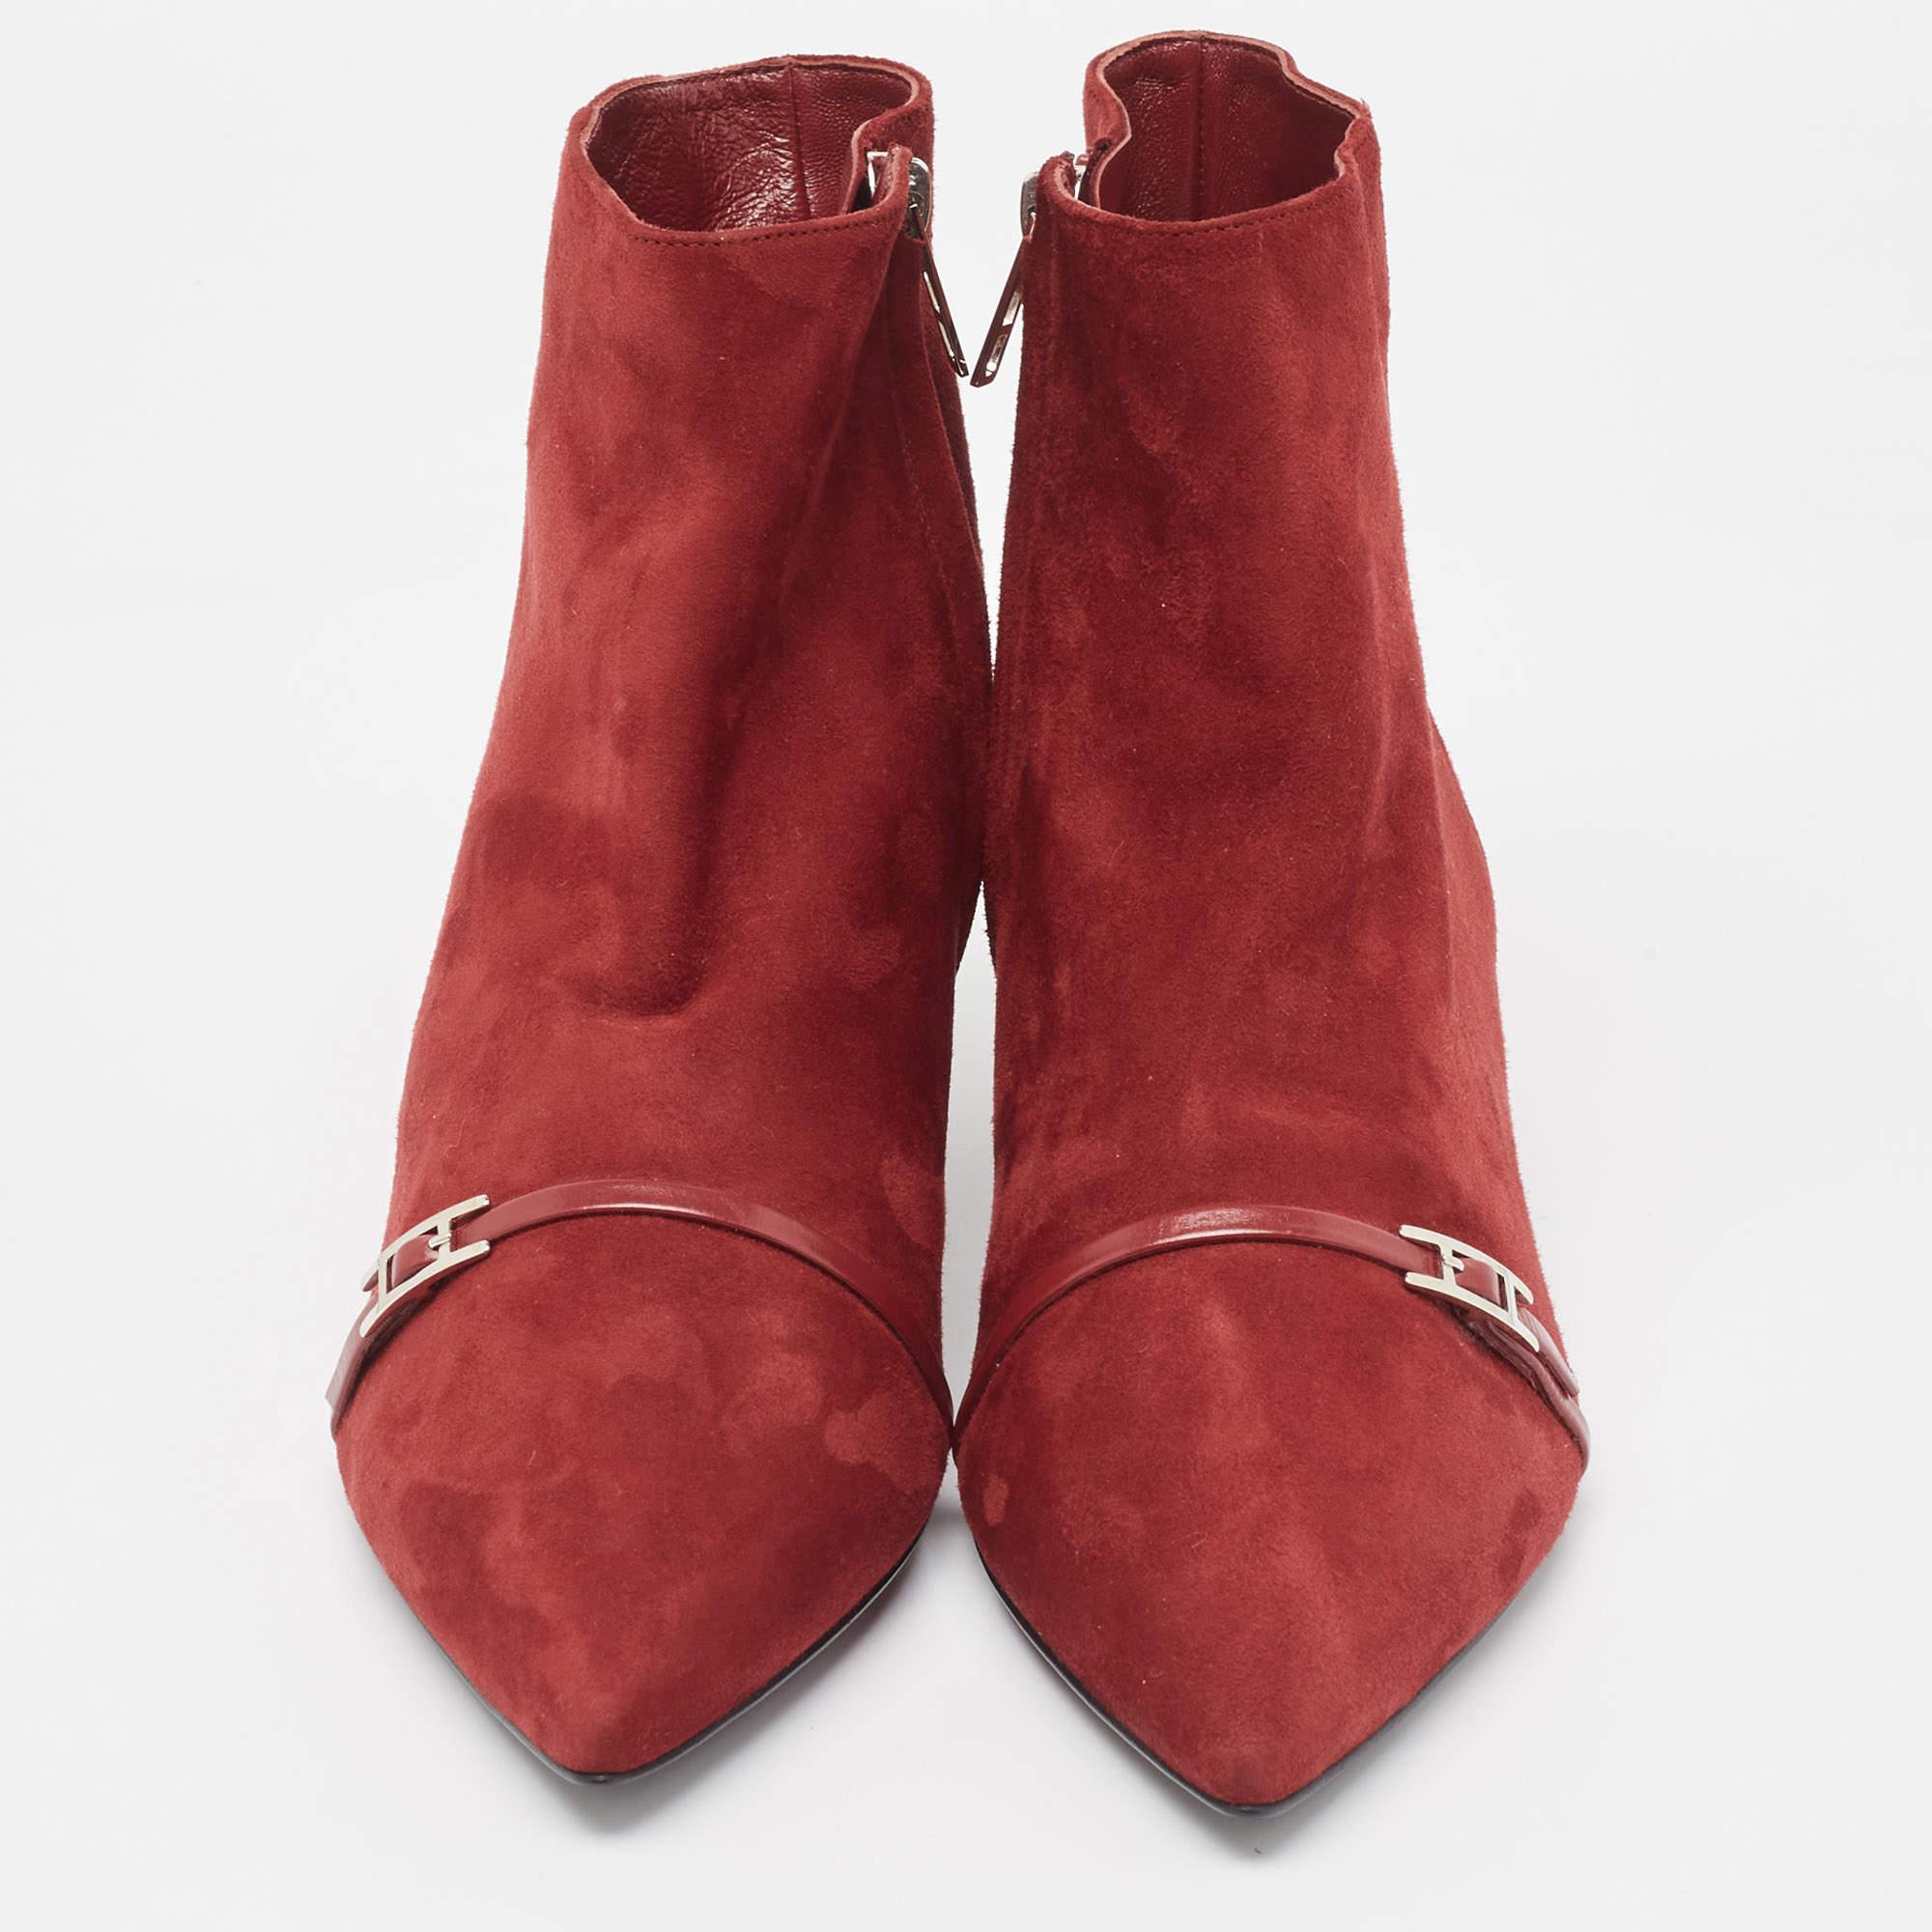 Women's Hermès Dark Red Suede Ankle Booties Size 39 For Sale